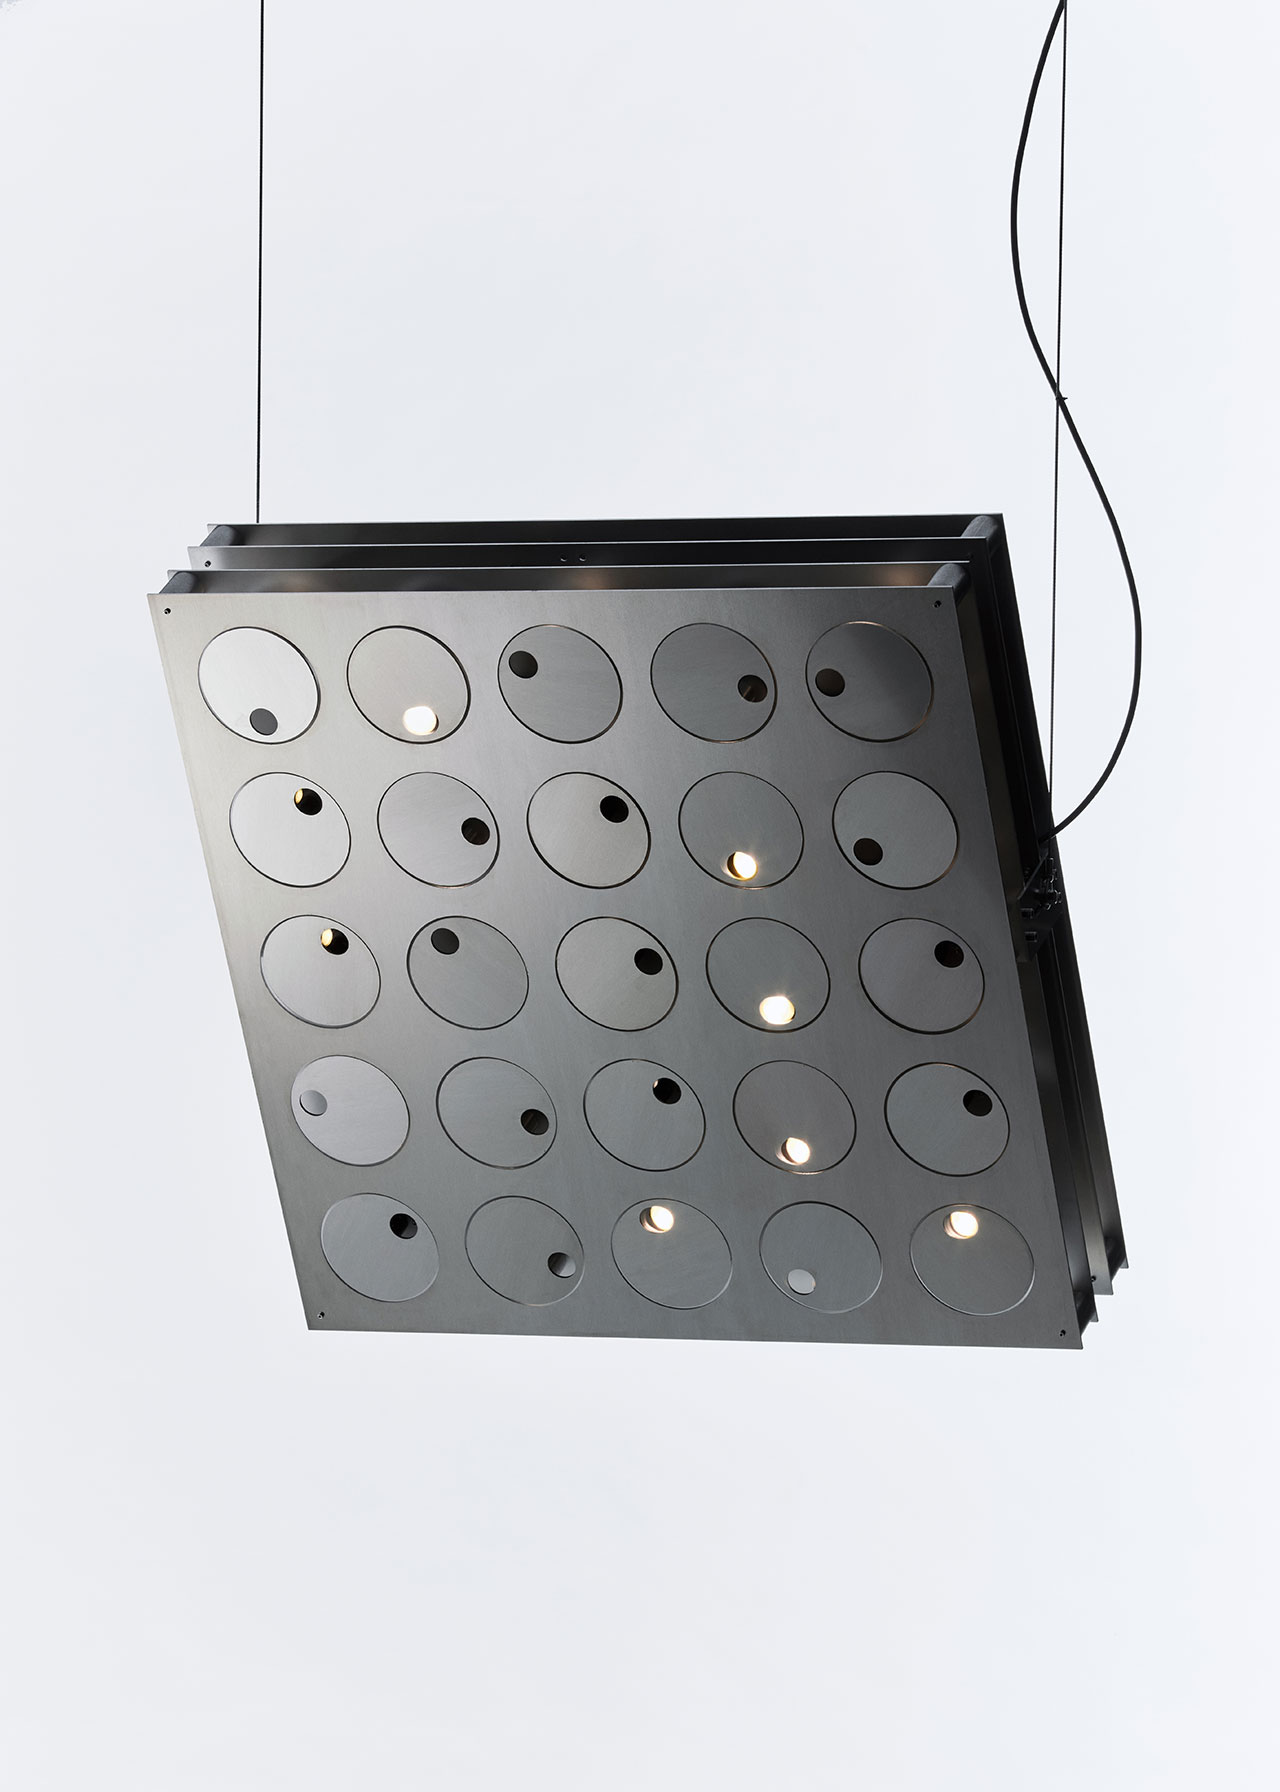 Flasher.
Materials: aluminium, G4 LED nuggets, printed technical and optical parts, mechanical transmission system, ball bearings, motors, converter (dimmable light).
Dimensions: 84 x 84 x 15cm  
Photography by Stanislas Huaux &amp; Jeremy Marchant.
© Studio Élémentaires